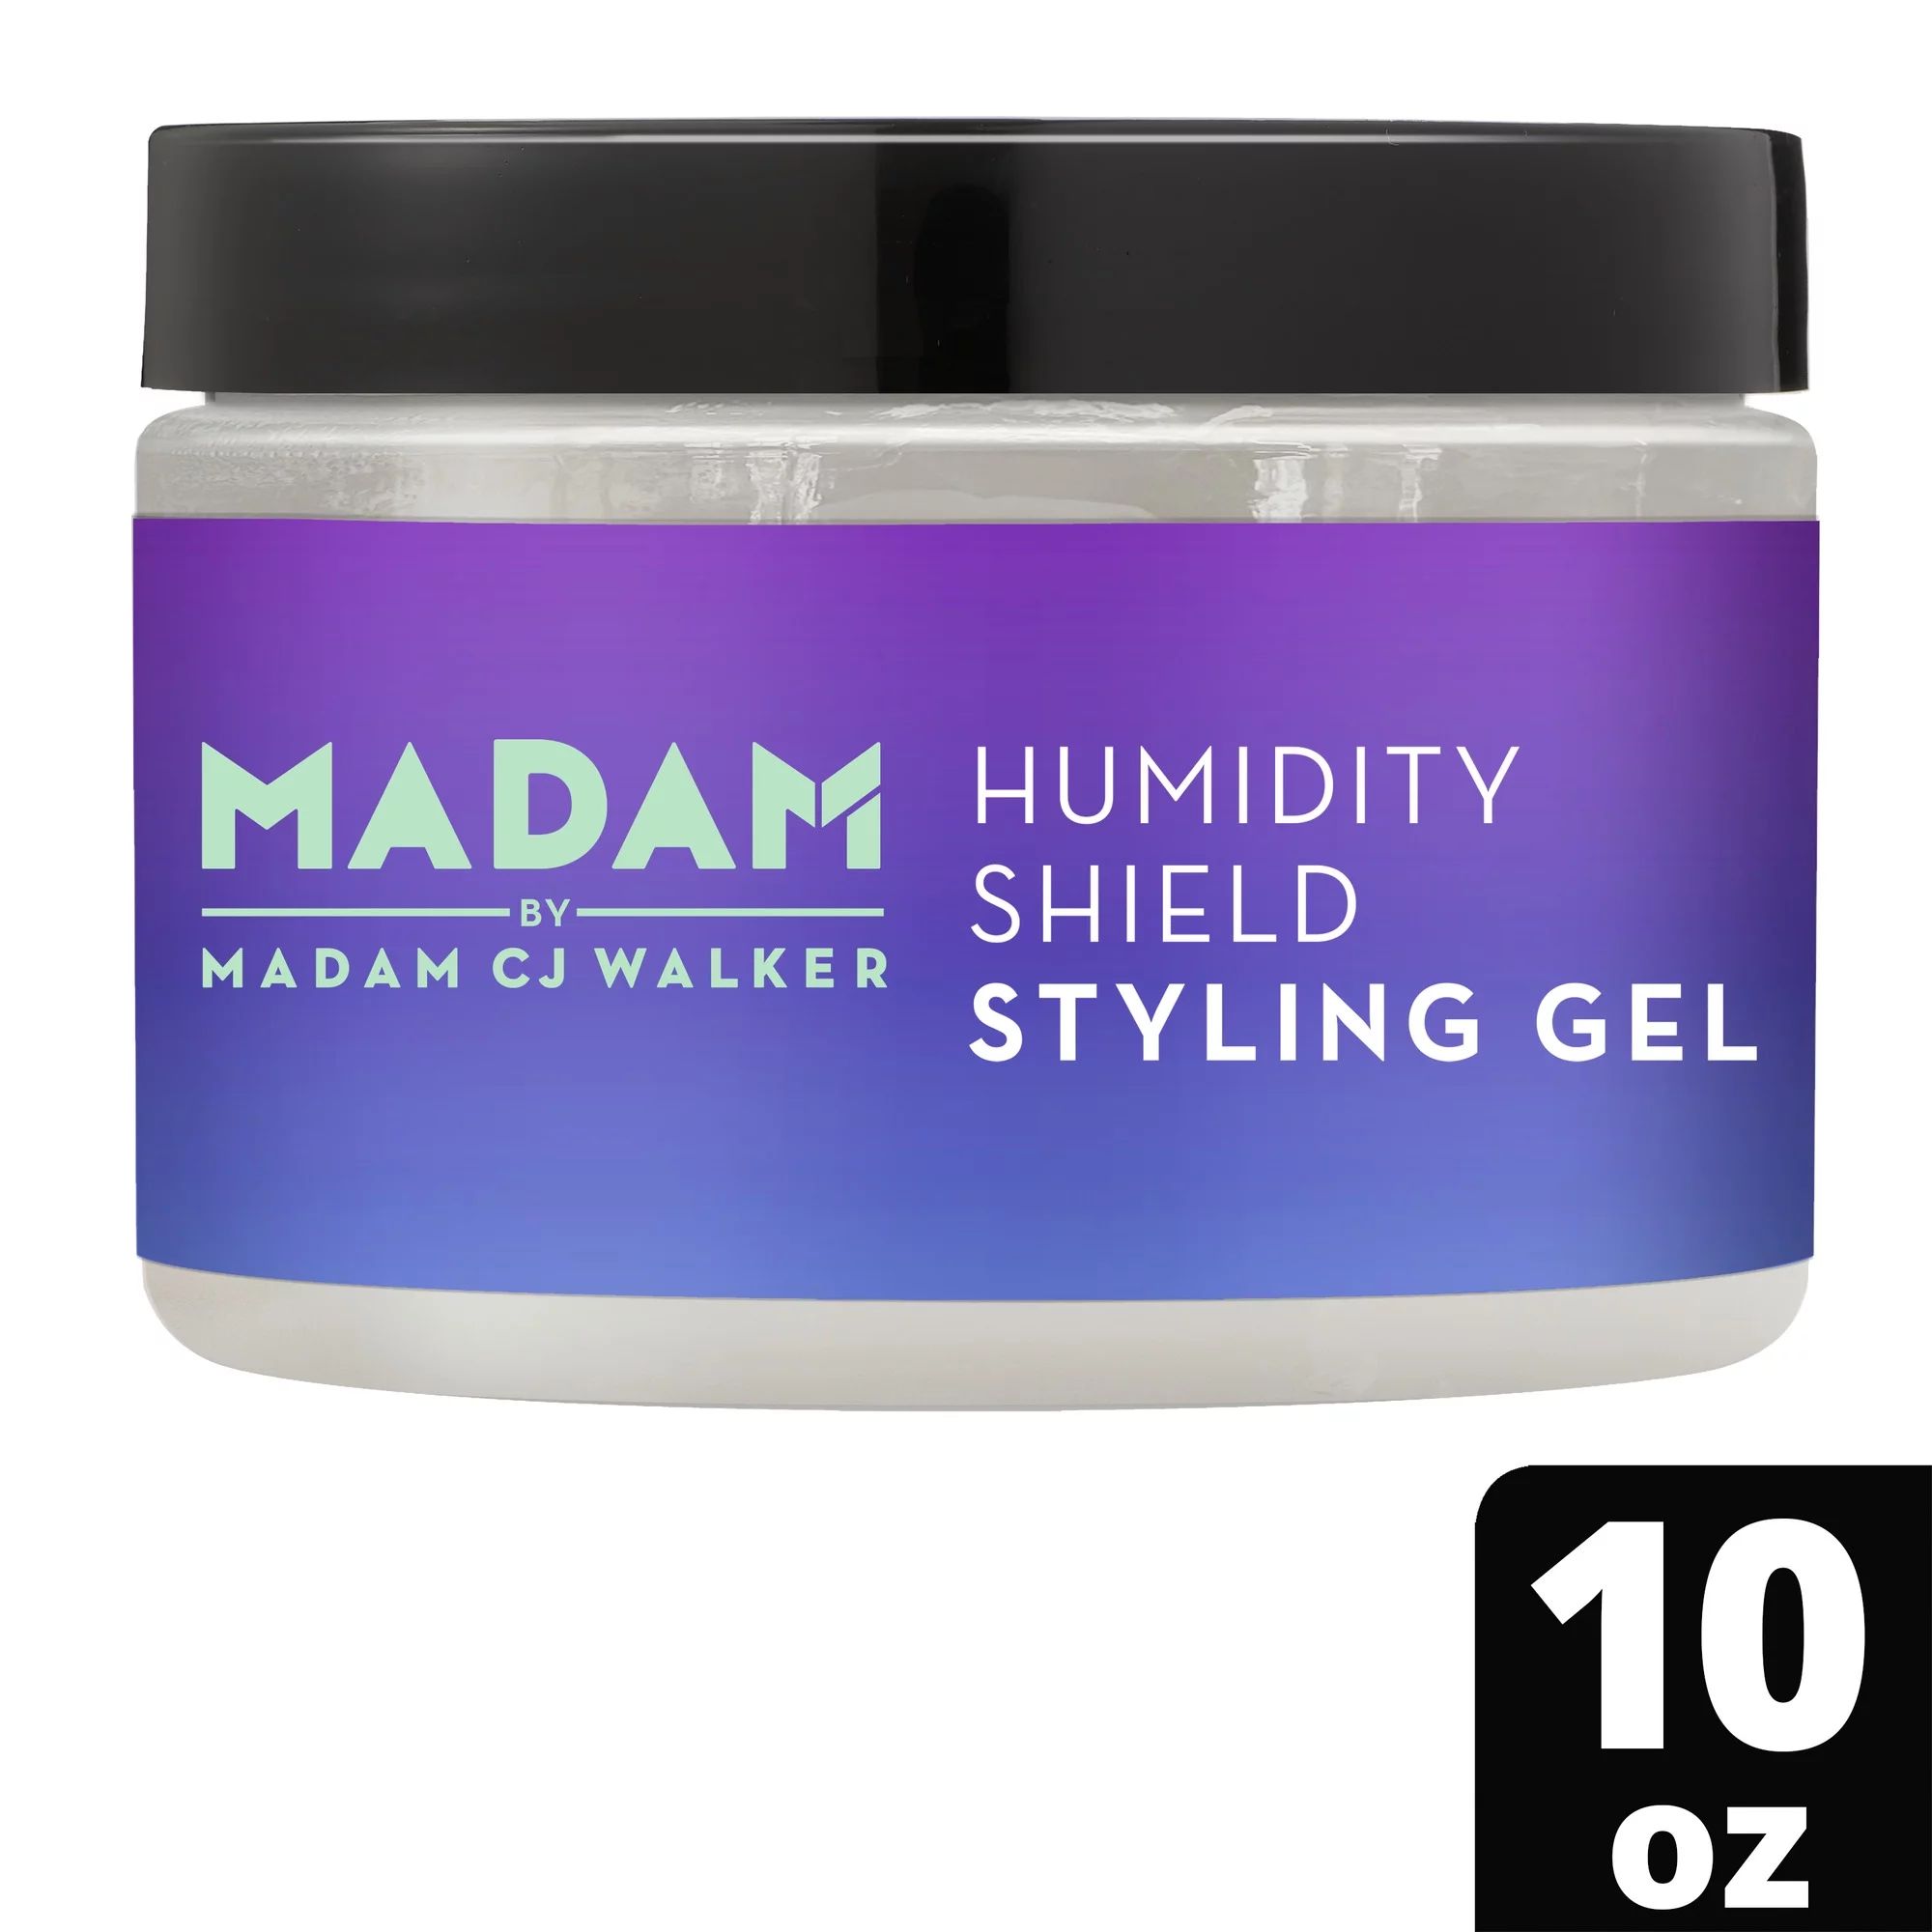 MADAM by Madam C.J. Walker Humidity Shield Styling Gel for Curly Styles Hair Gel That Provides a ... | Walmart (US)